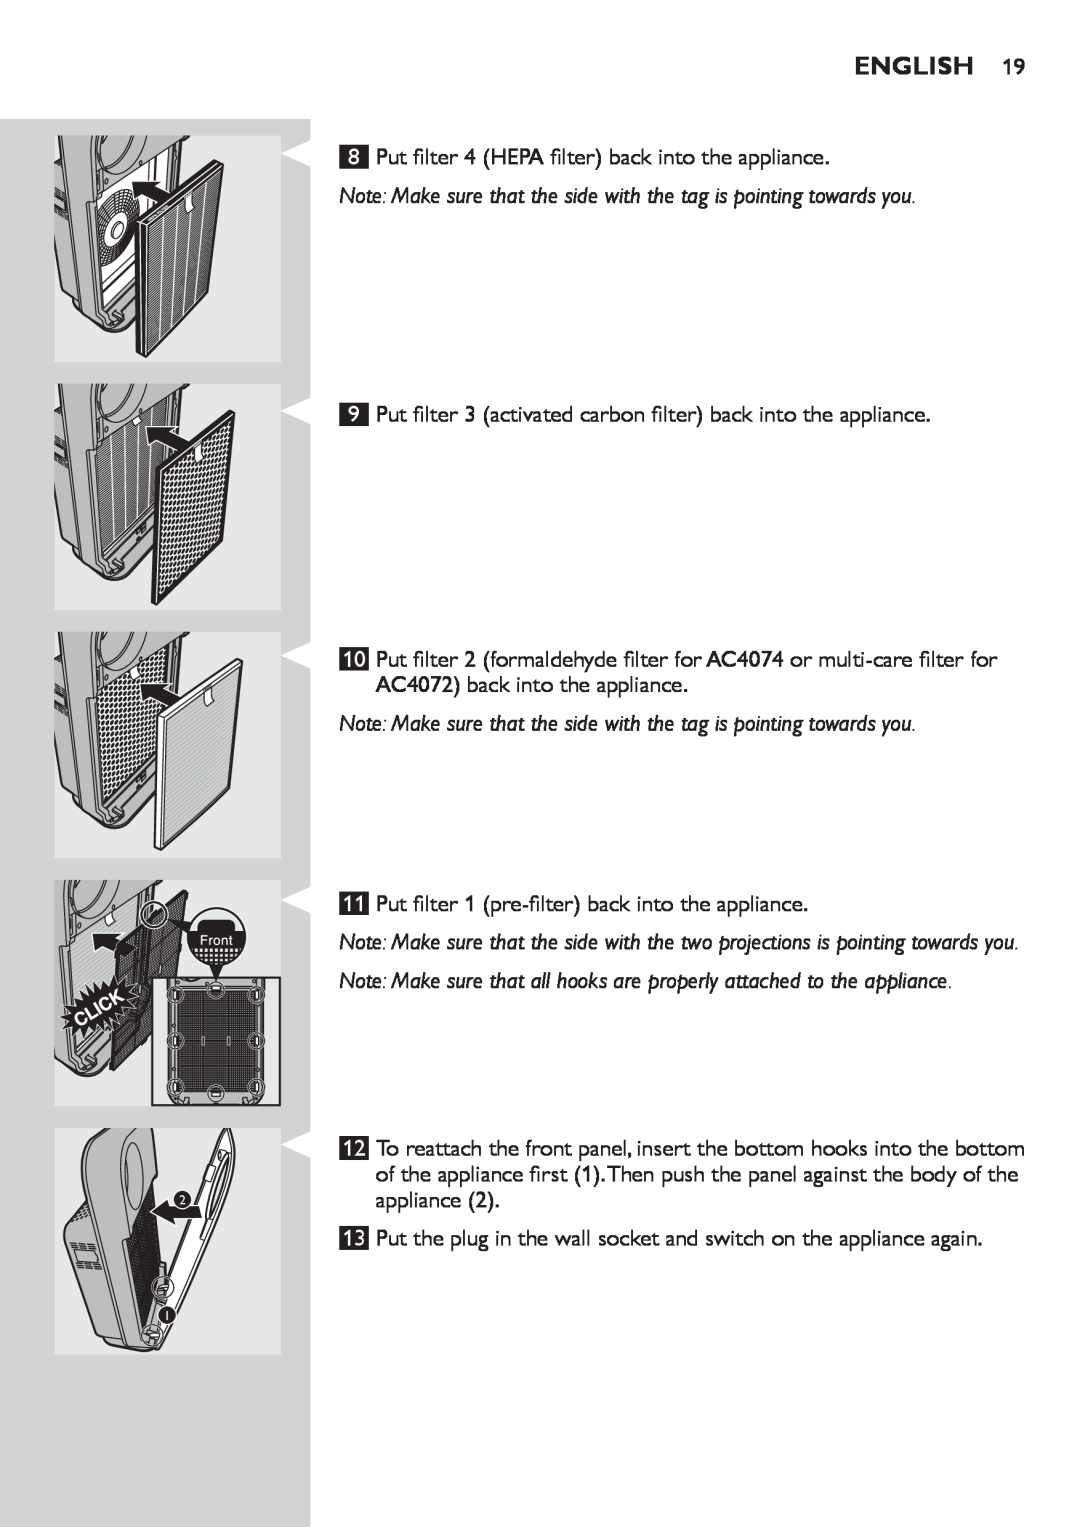 Philips AC4072 user manual English, Put filter 4 HEPA filter back into the appliance 